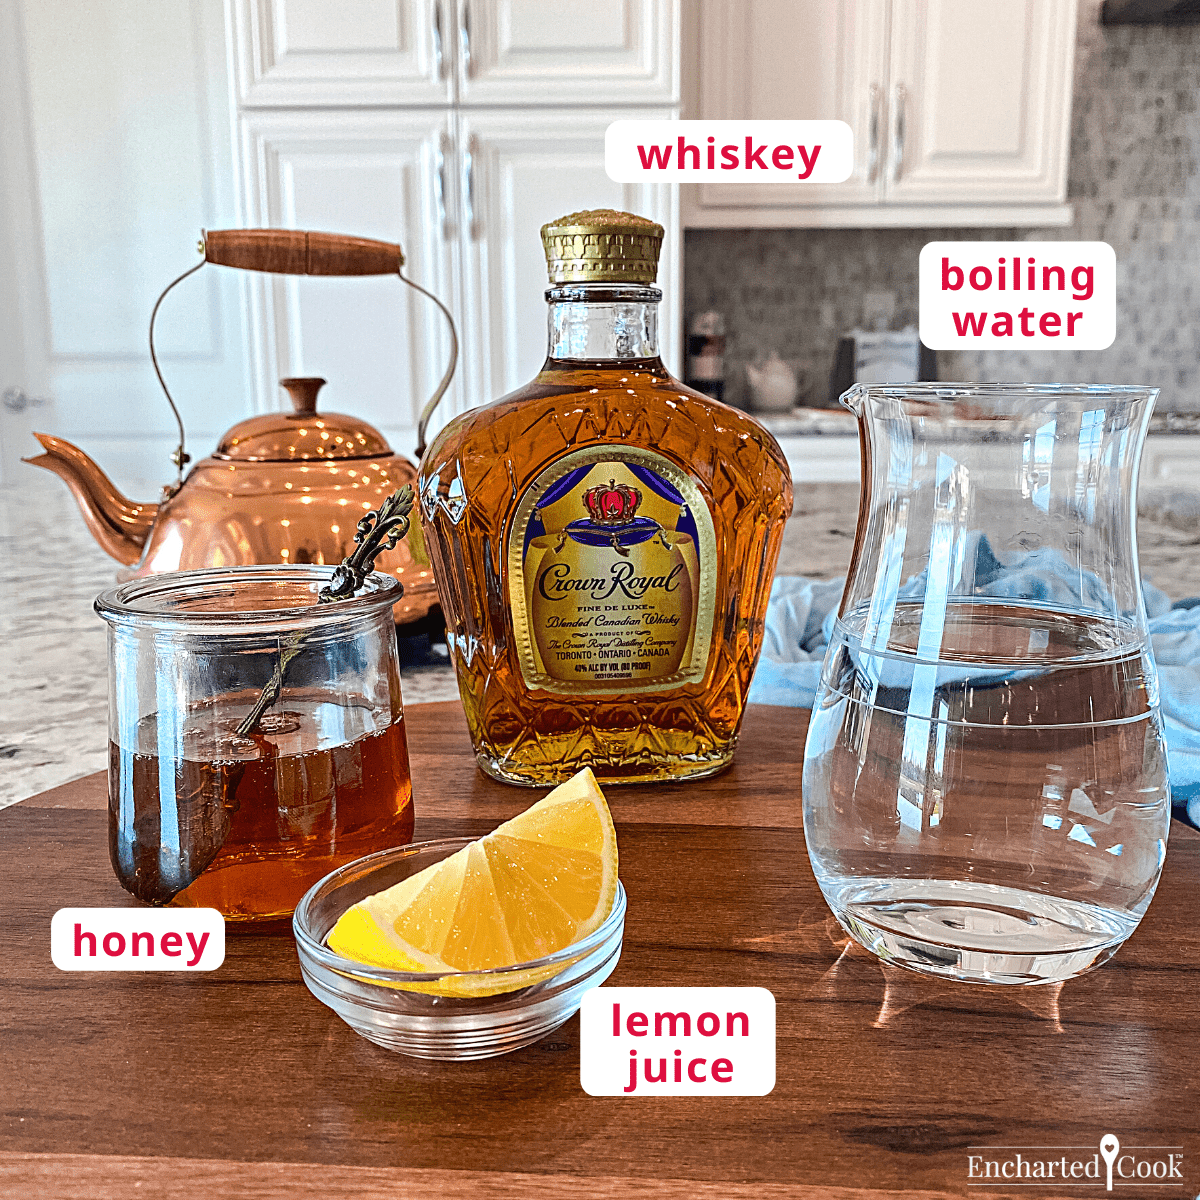 The ingredients, clockwise from top: whiskey, boiling water, lemon juice, and honey.